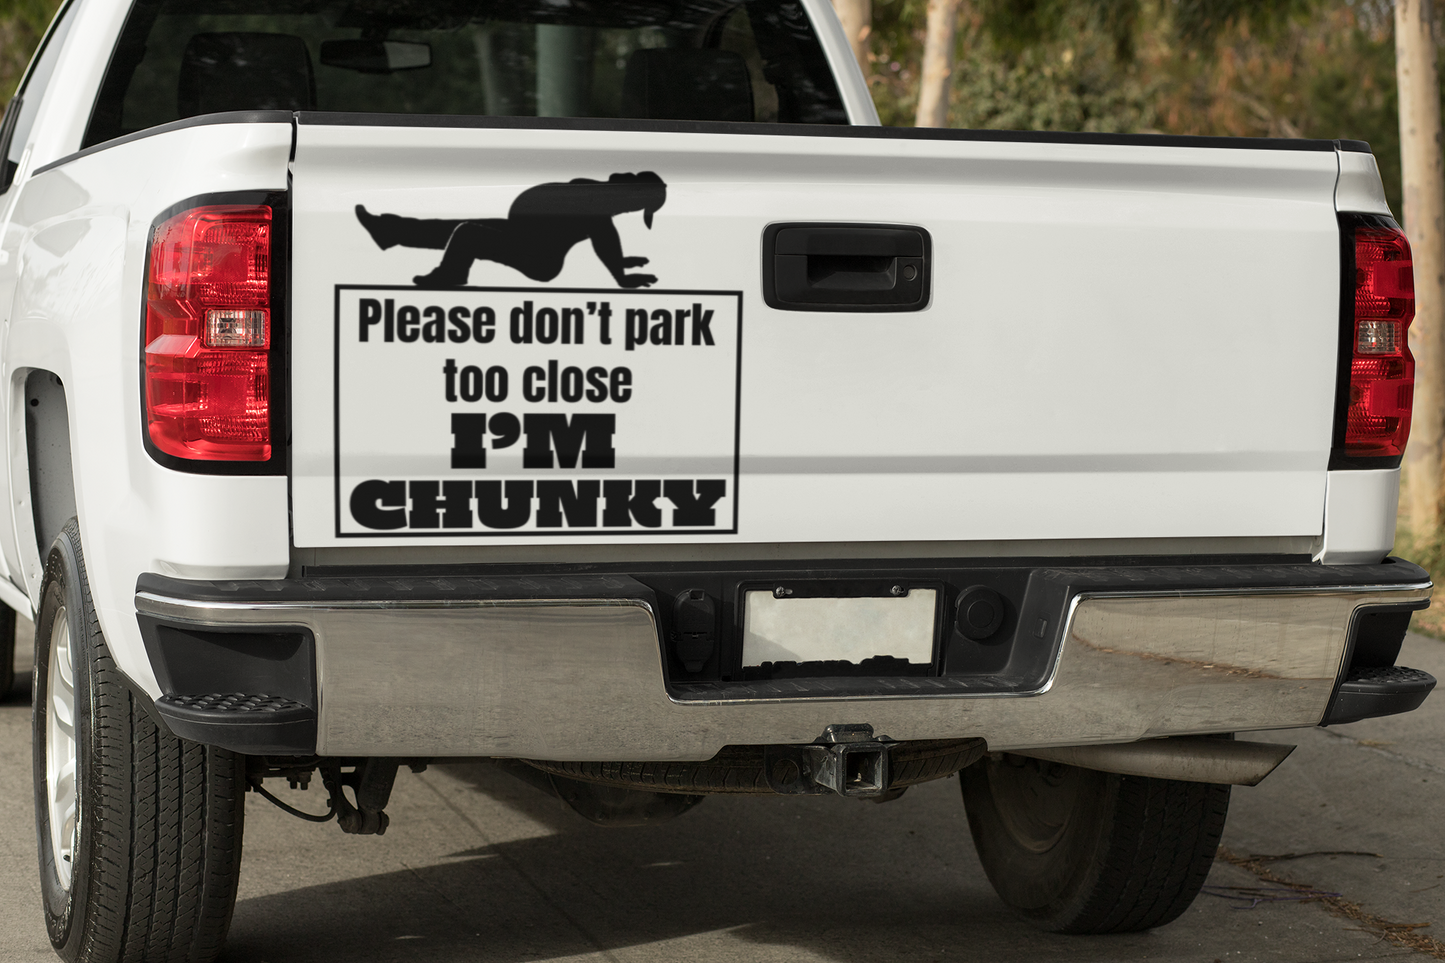 Don't park too close, I'm chunky Vinyl decal male boss gift car decor dads day gift gift for dad gift for grandpa gift for her gift for him gift for husband gift for mom gift for sister gift for wife moms gift Unique gift Vinyl Vinyl decals vinyl sticker Vinyl stickers window decal window sticker